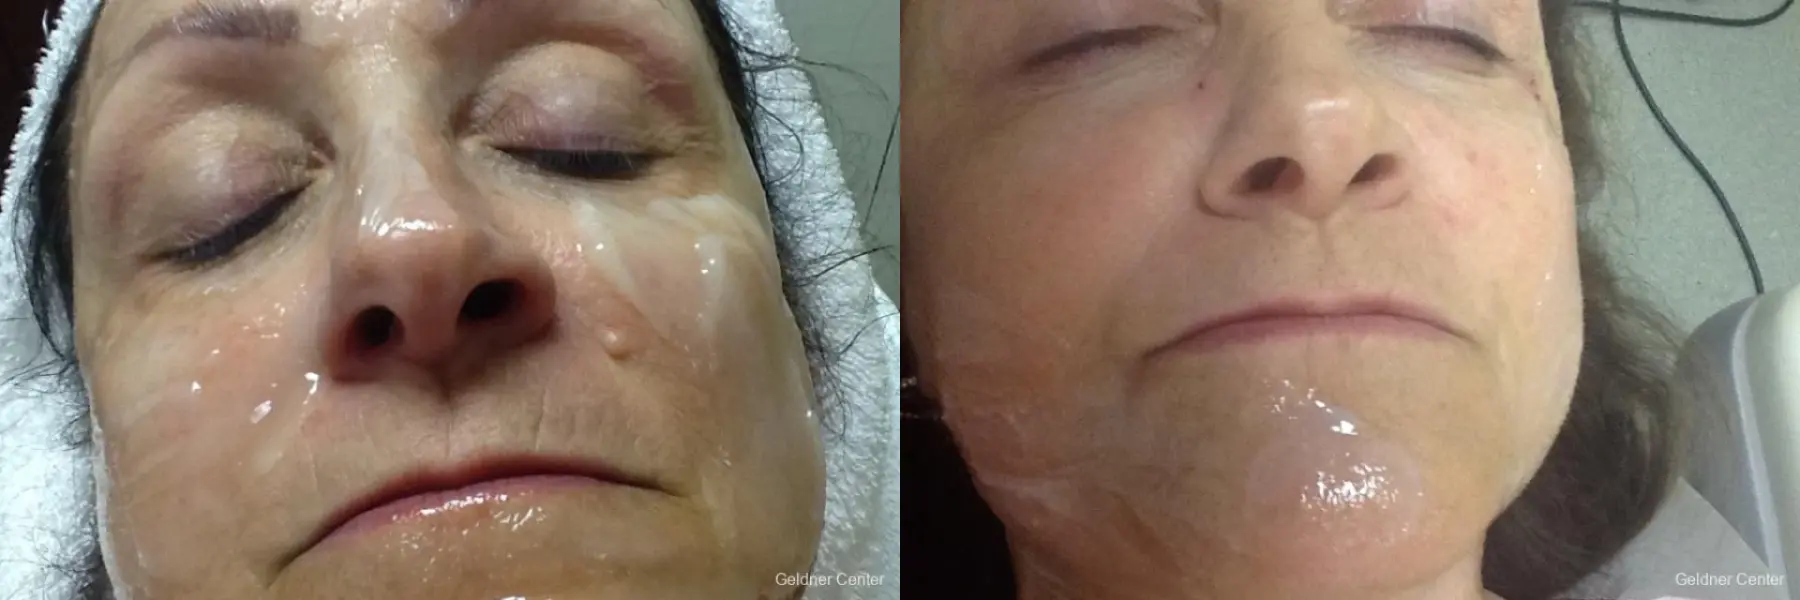 mole laser removal - Before and After 1